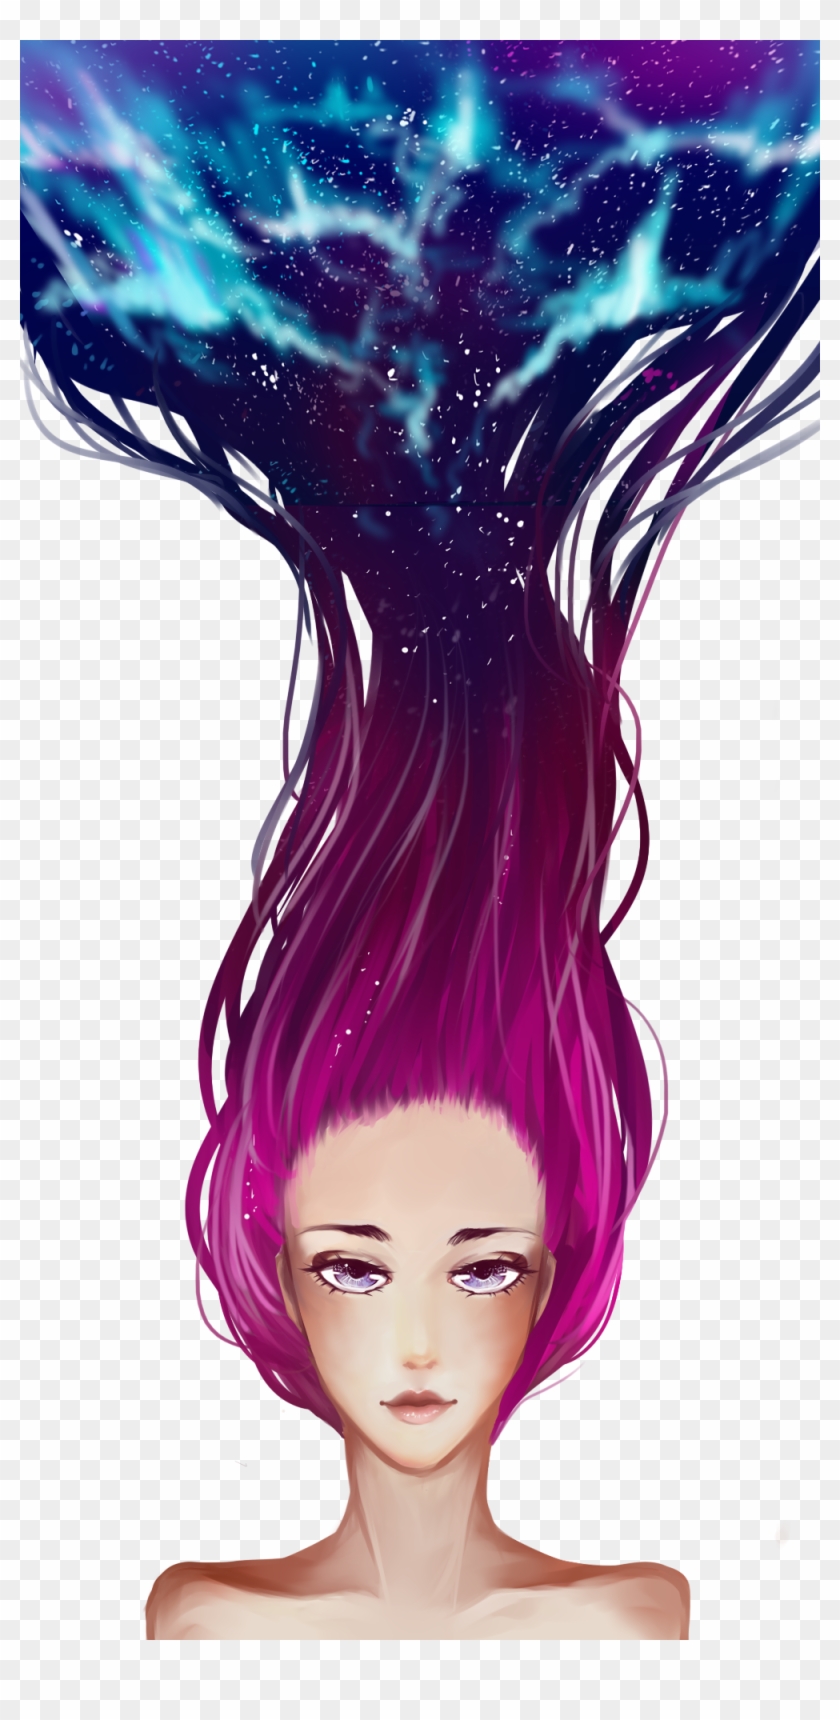 1000 X 2000 11 0 - Drawing Of Girl With Galaxy Hair Clipart